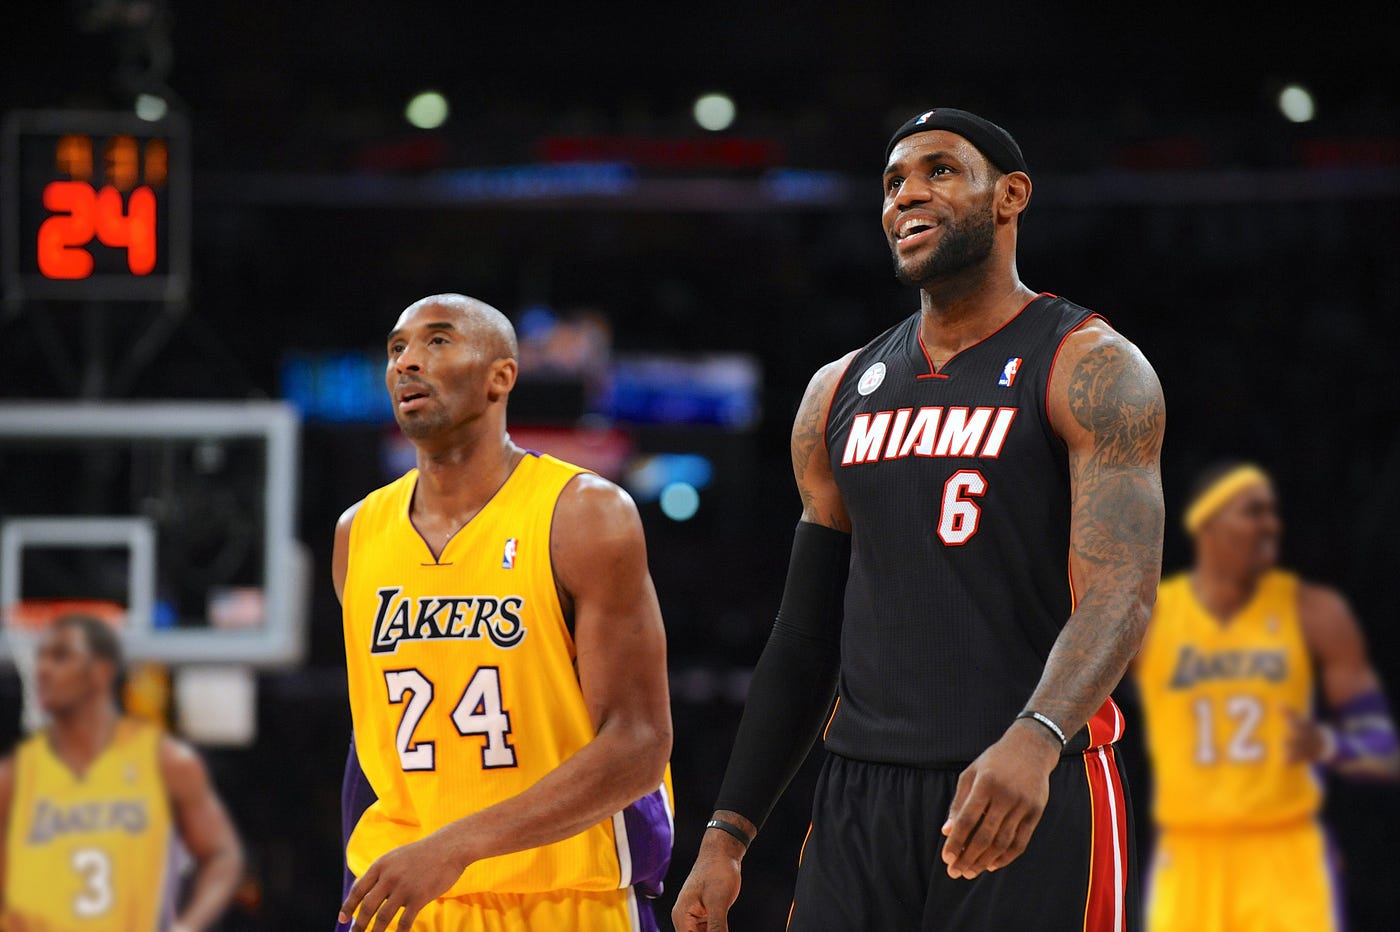 What If Kobe Bryant And LeBron James Met In The 2009 NBA Finals